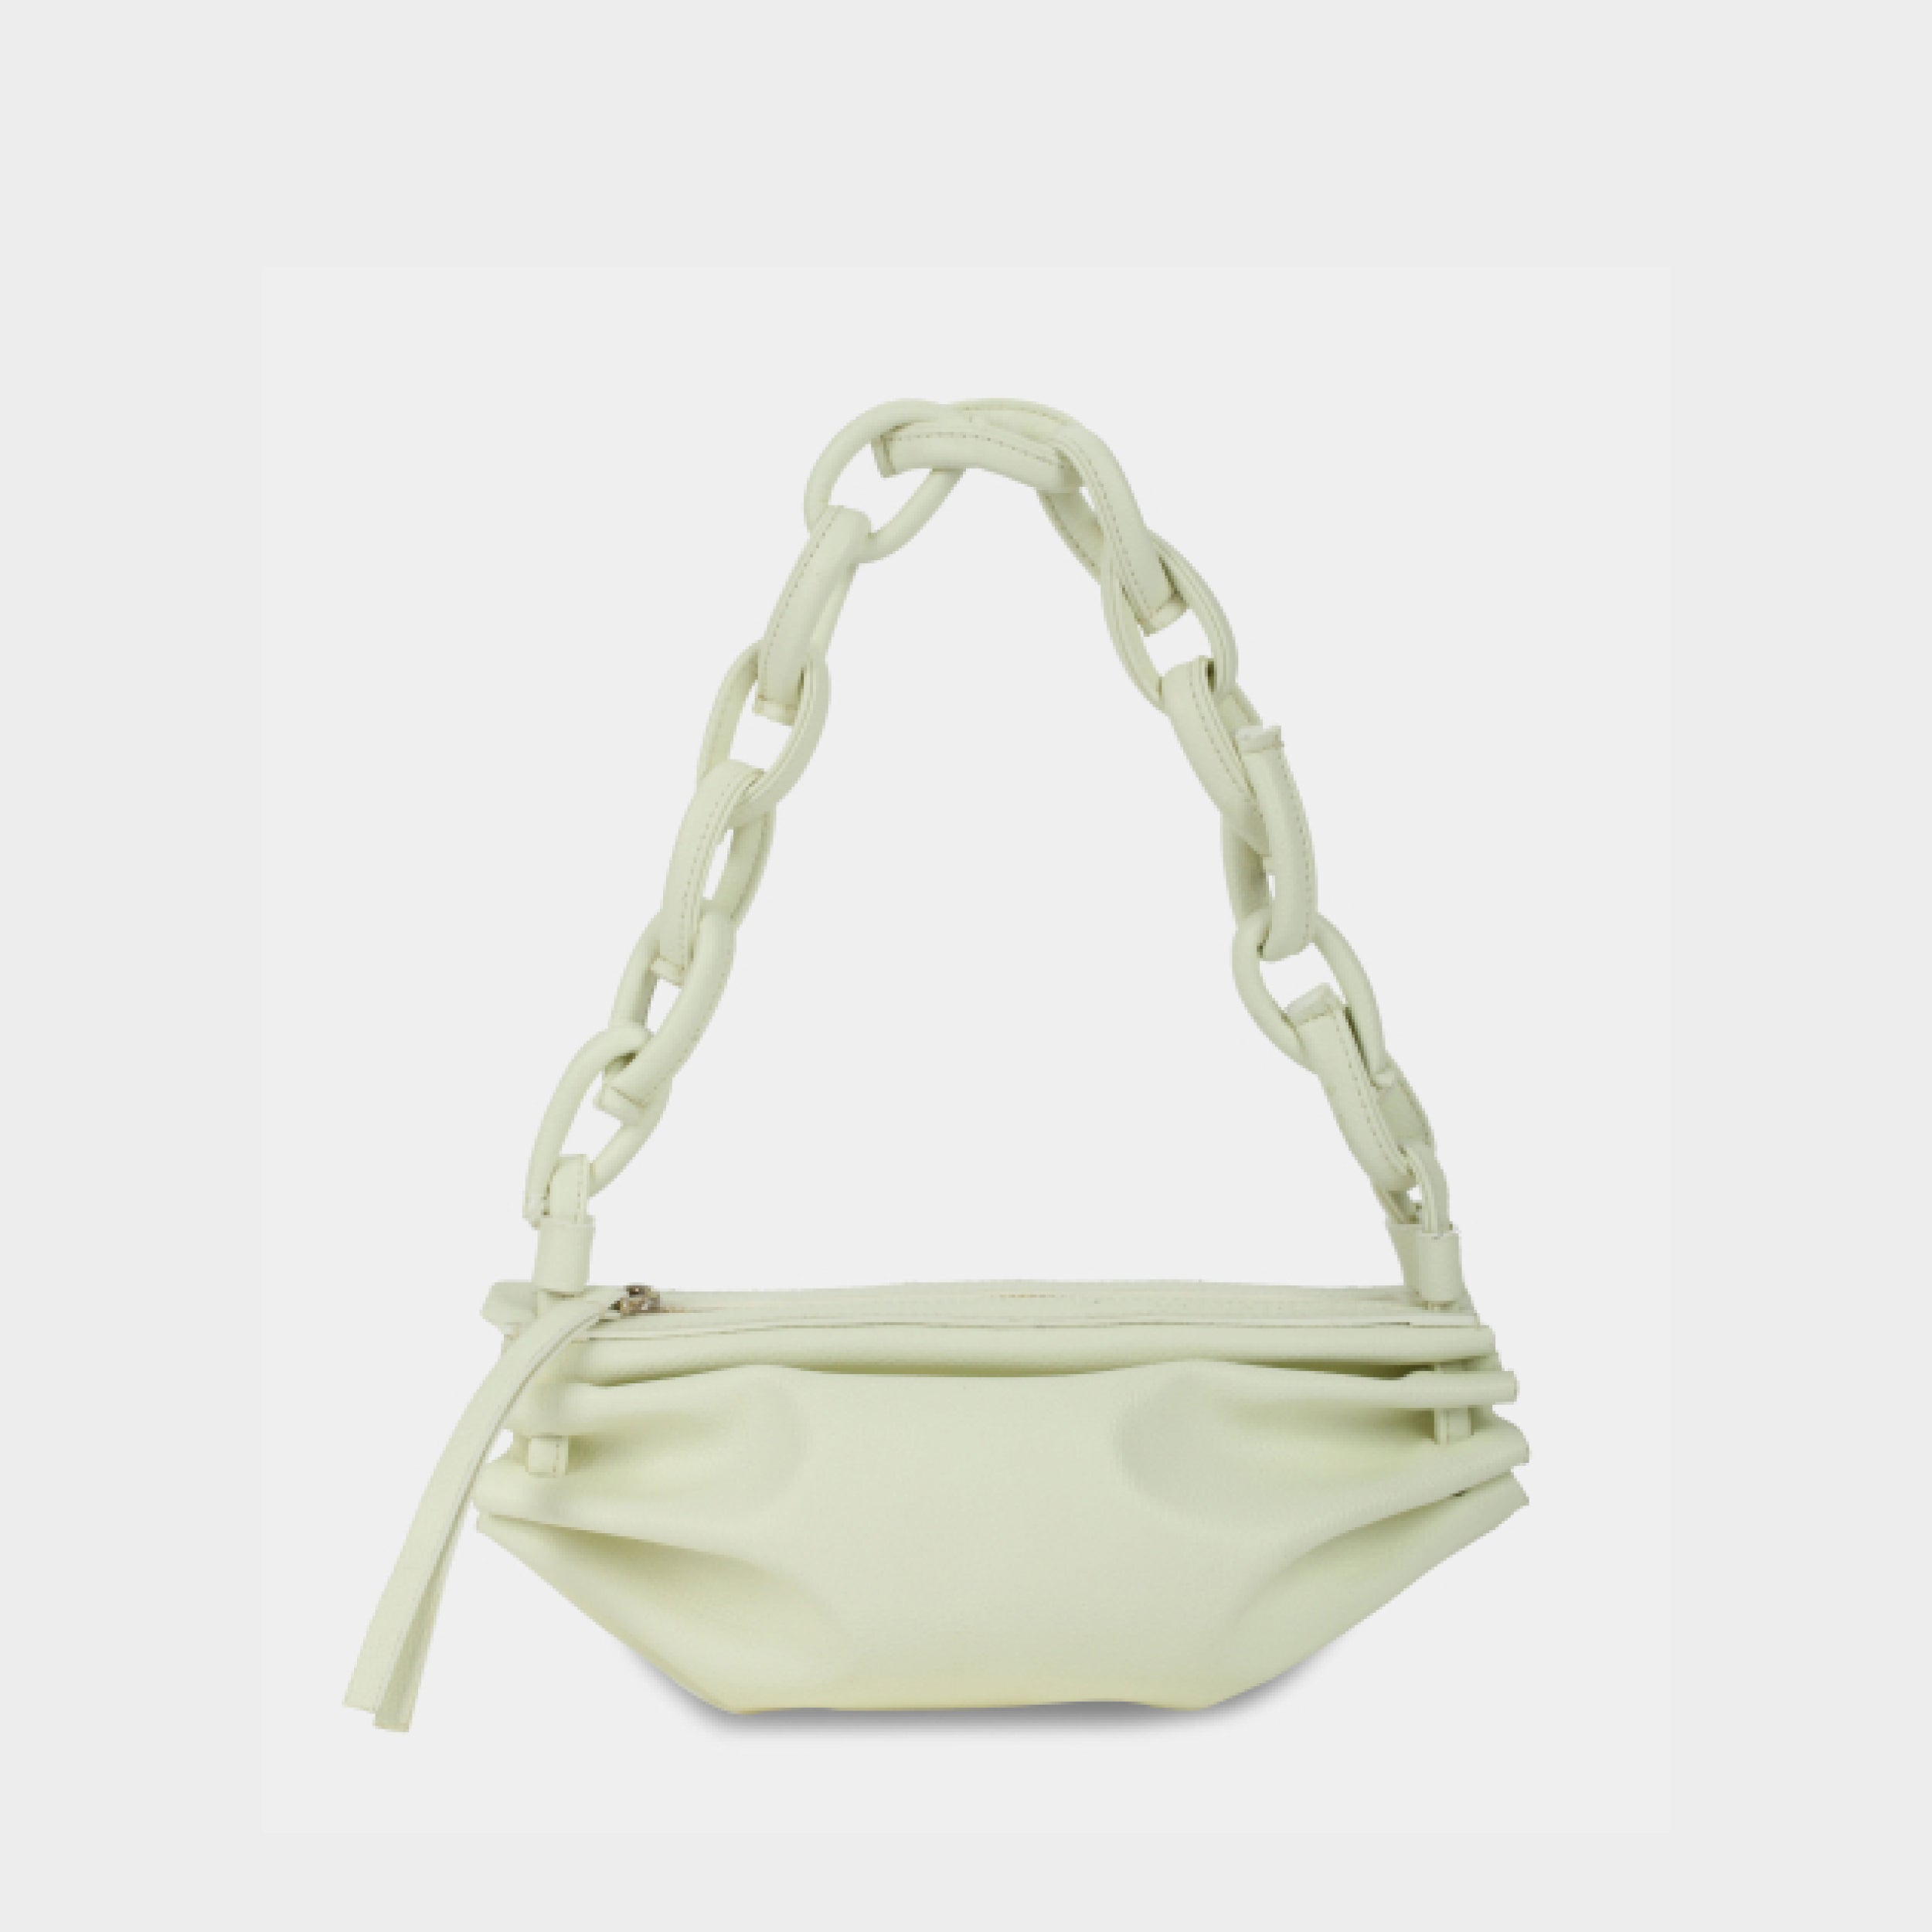 BOAT bag small size (S) white color